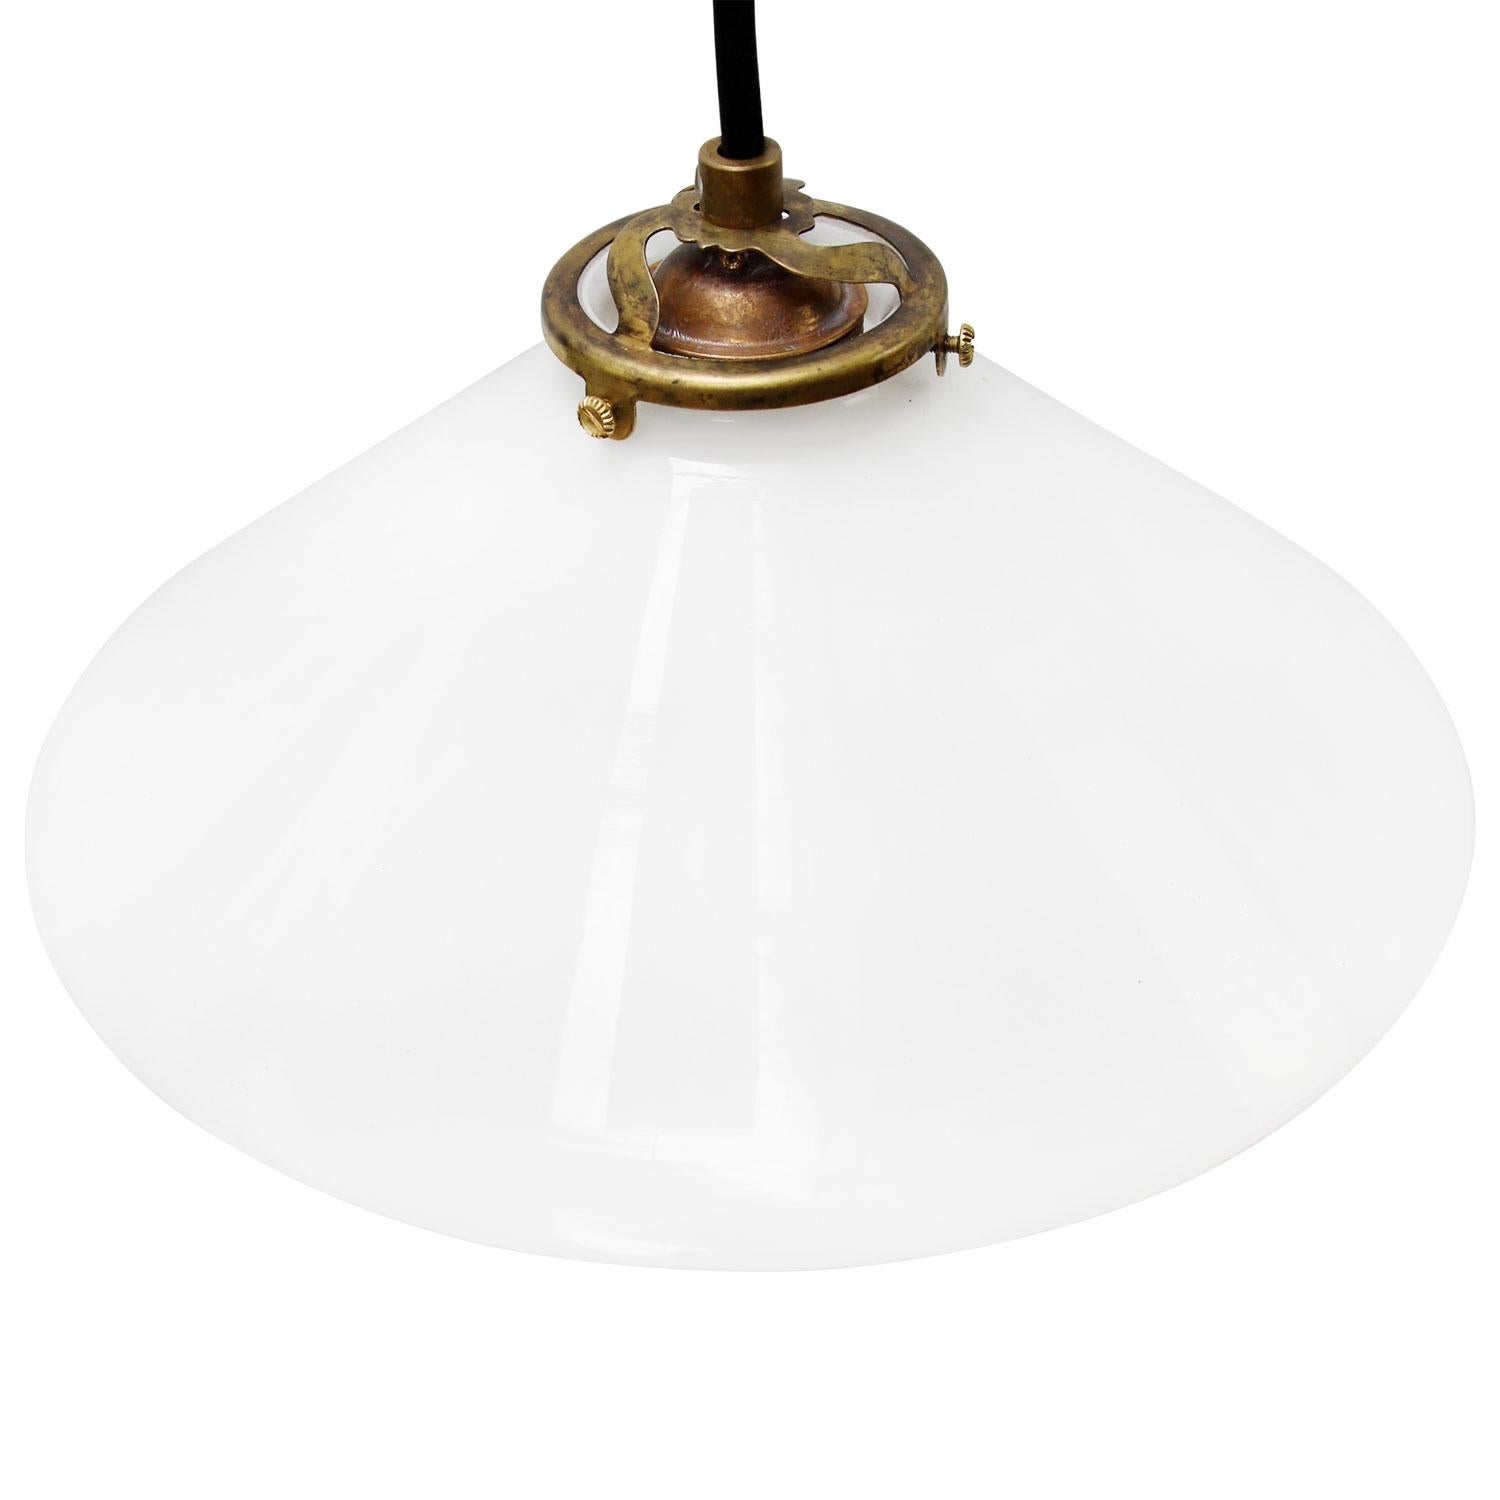 French opaline glass industrial pendant. Excluding light bulb.

Measure: Weight 1.0 kg / 2.2 lb

riced per individual item. All lamps have been made suitable by international standards for incandescent light bulbs, energy-efficient and LED